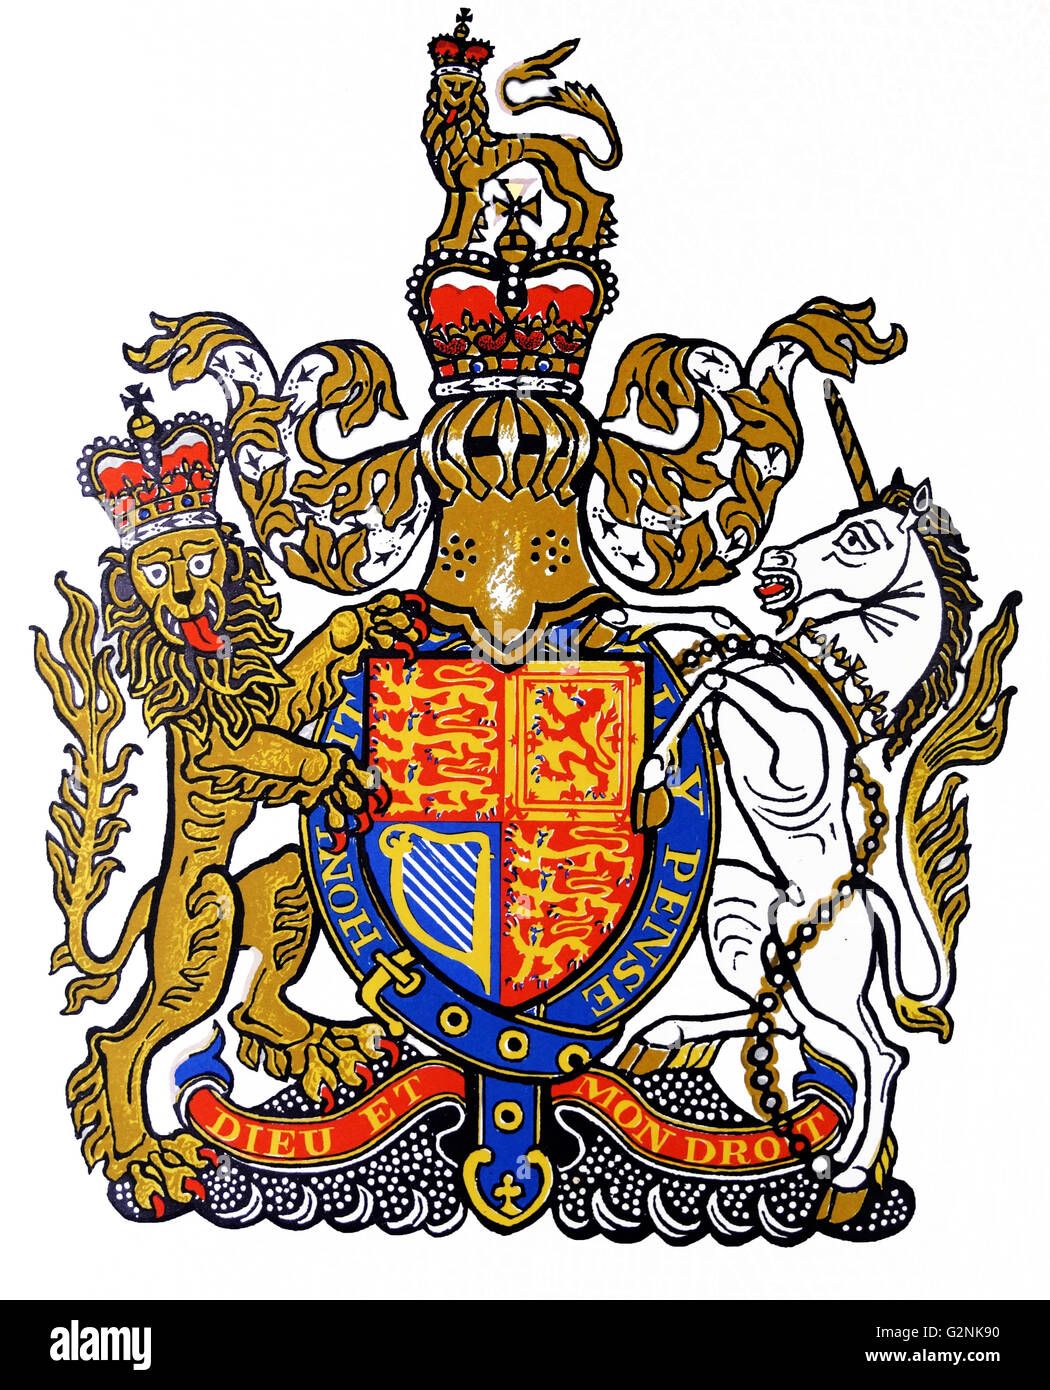 The coat of arms of the British monarch bearing the motto of English monarchs, Dieu et mon droit (God and my right). Drawn by Edward Bawden CBE RA (1903 – 1989) was an English graphic artist. Stock Photo